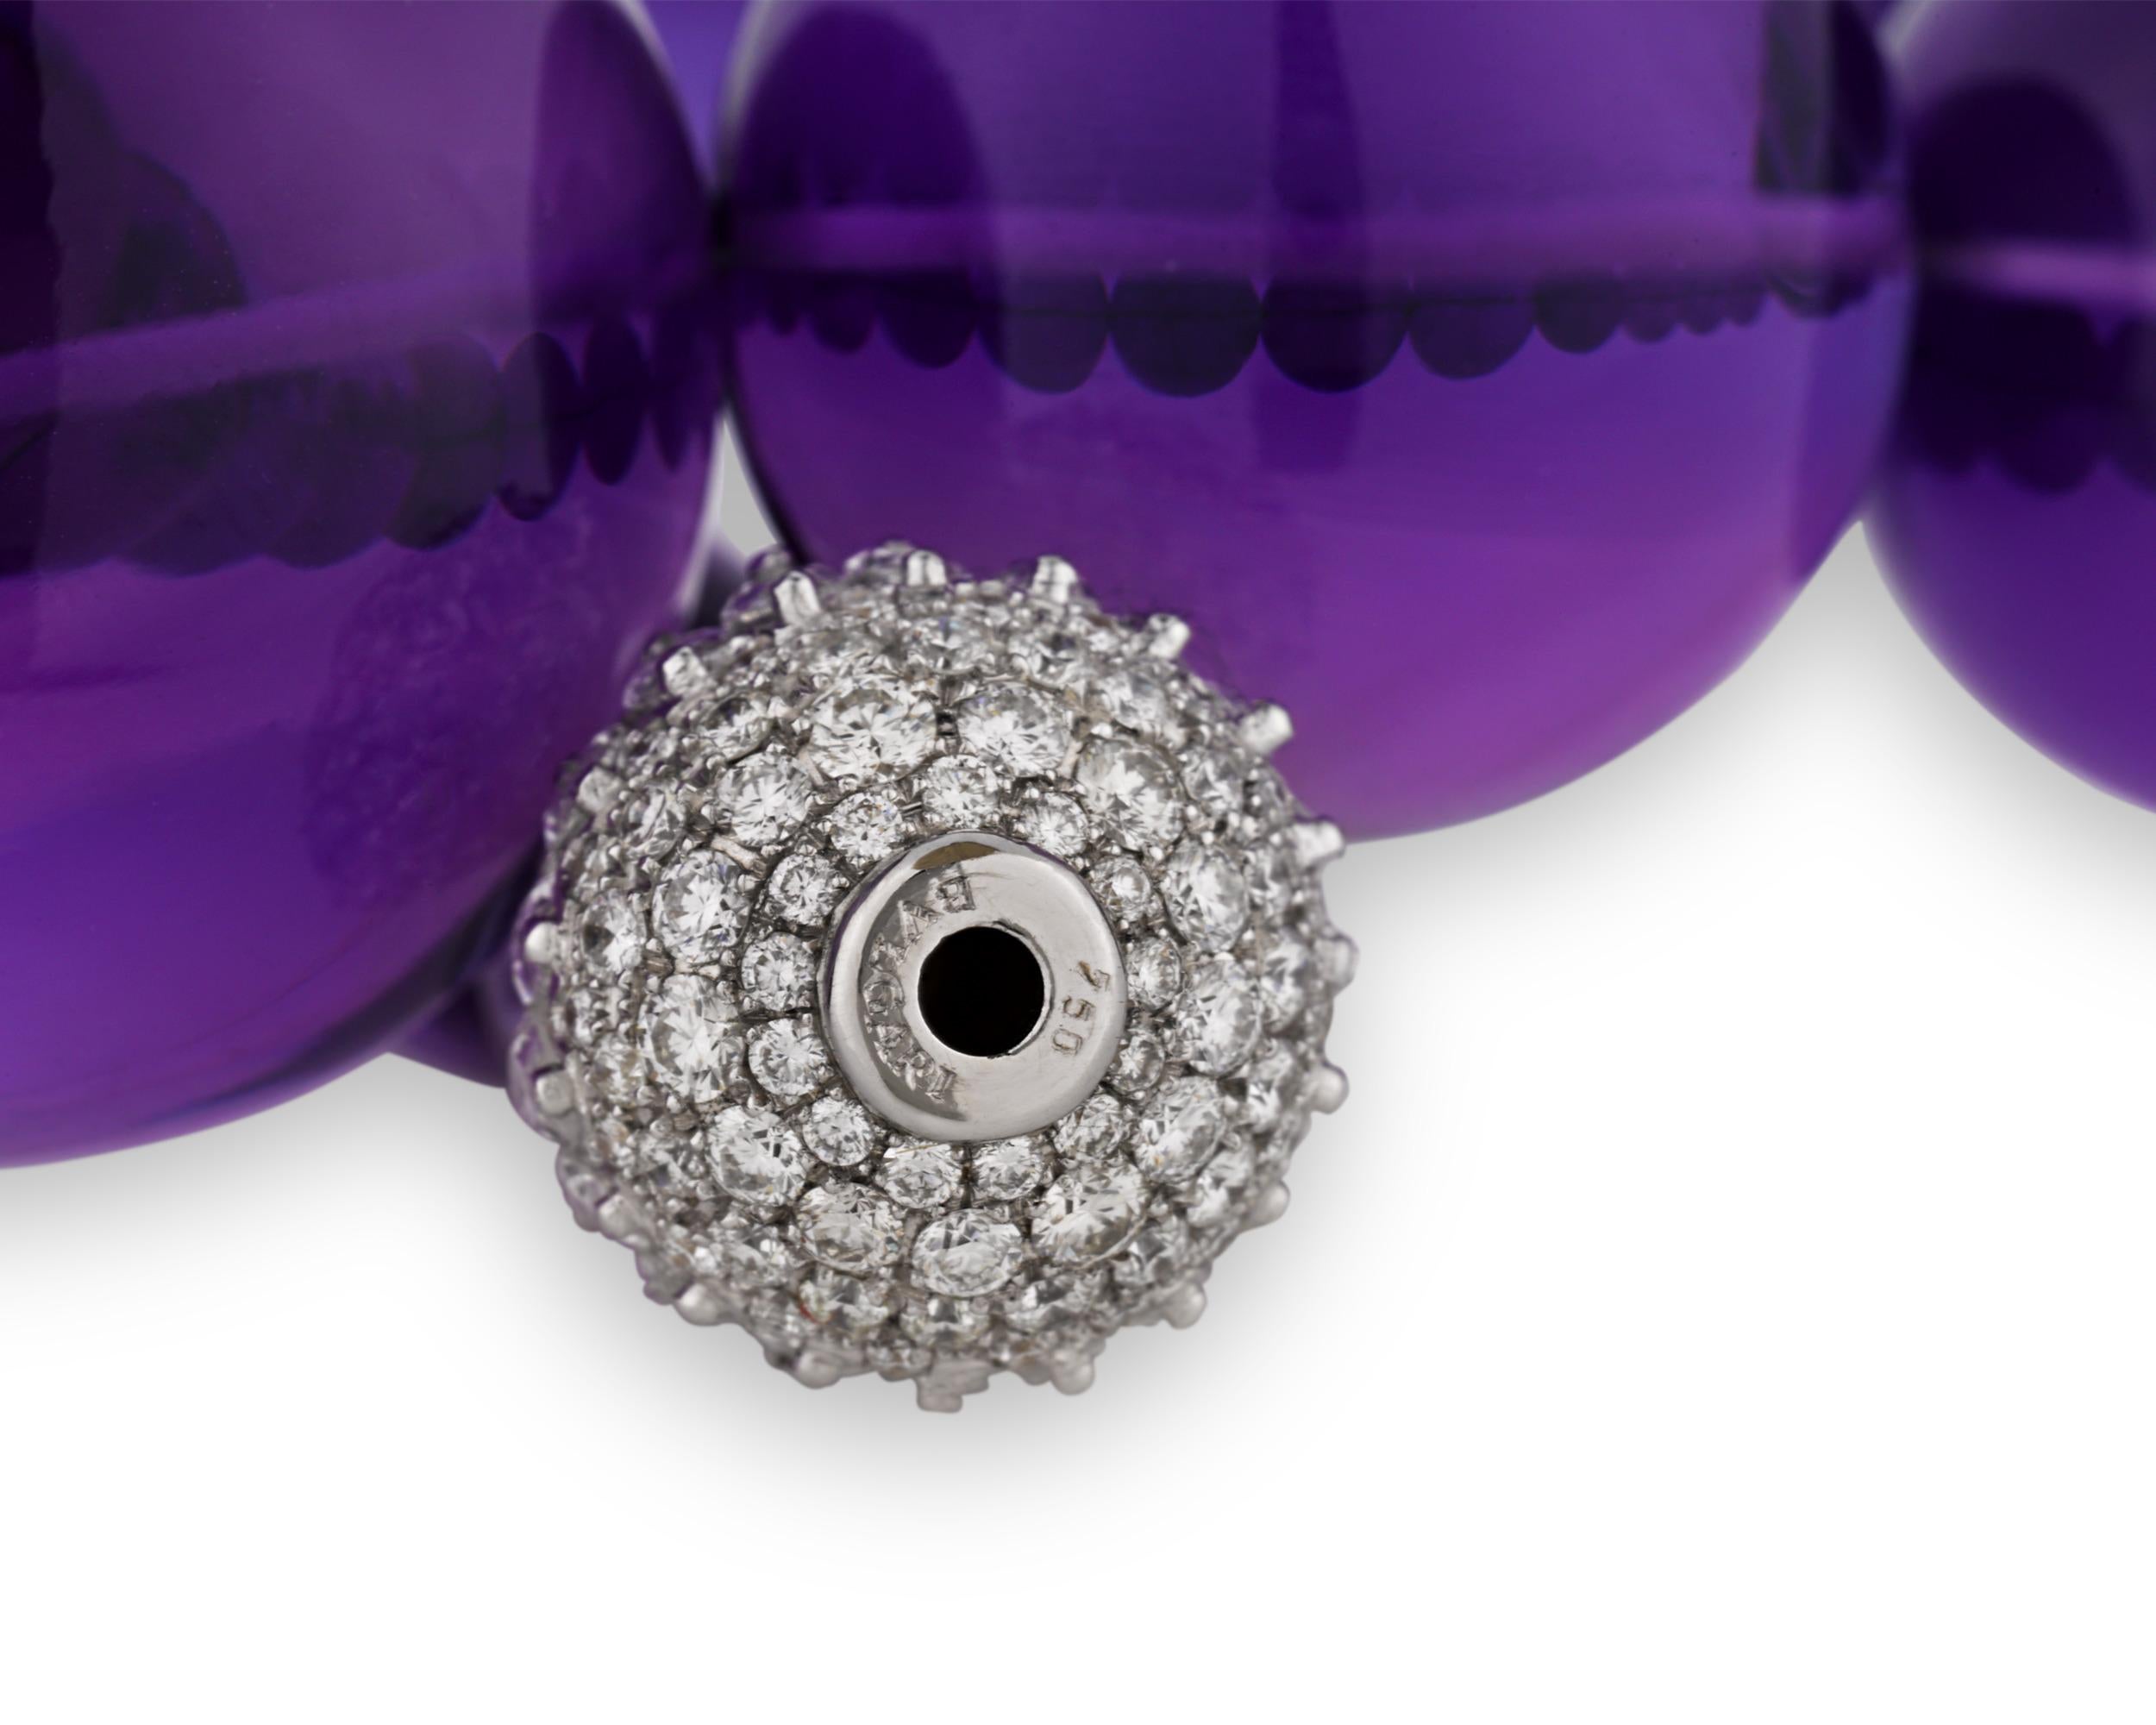 Thirty-one luscious amethyst beads comprise this remarkable Bulgari necklace. Displaying an enviable violet hue, the beads possess a beautiful symmetry and high polish that shows their color to best effect. Additionally, a diamond clasp provides